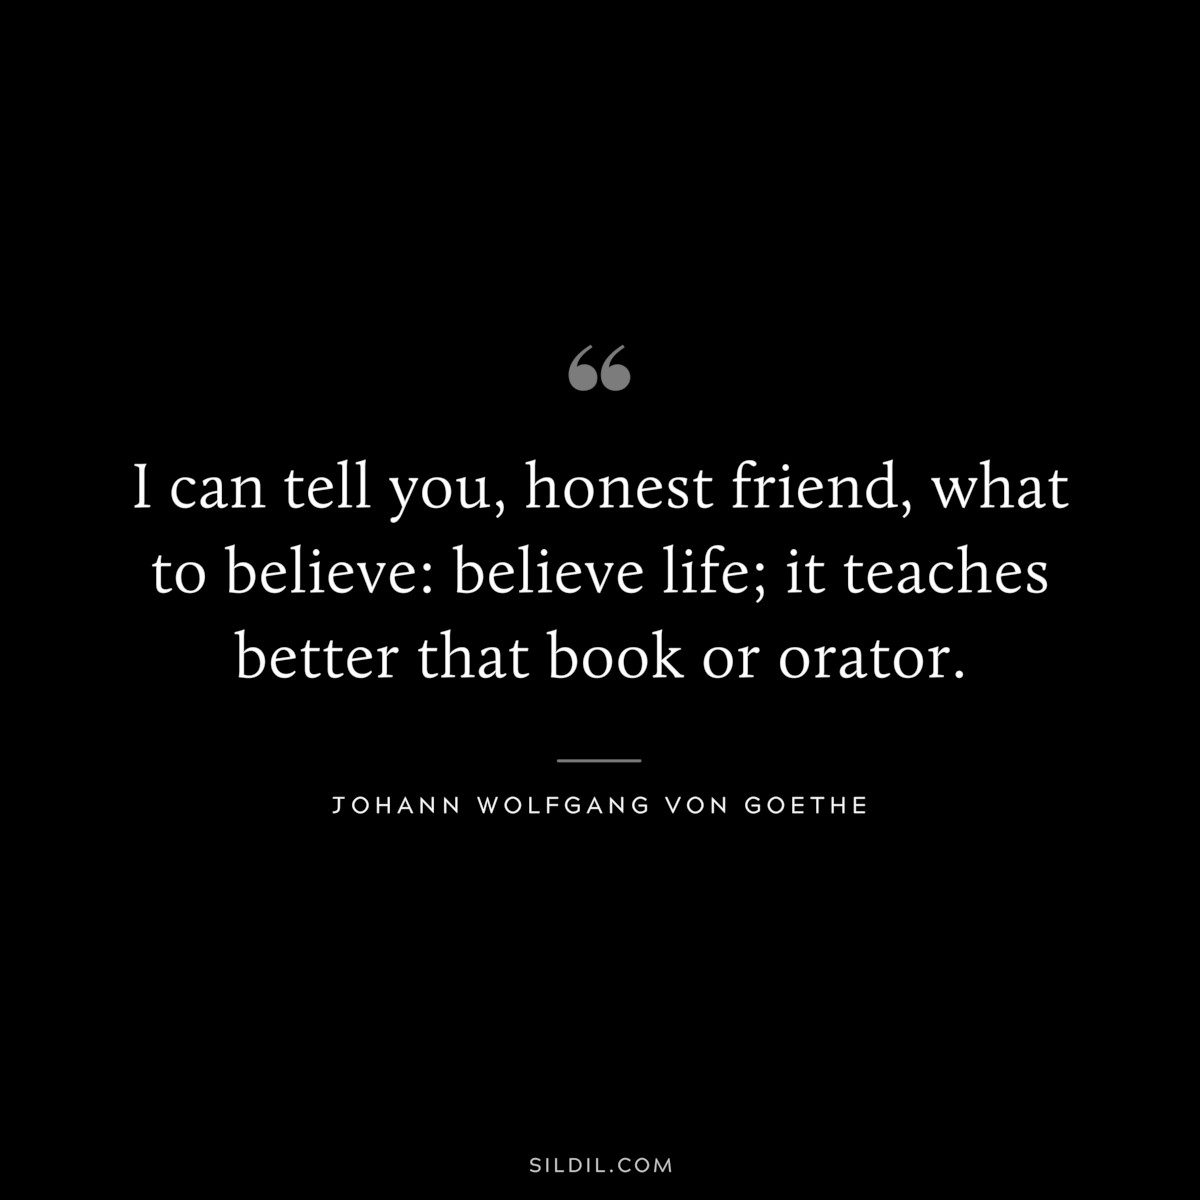 I can tell you, honest friend, what to believe: believe life; it teaches better that book or orator.― Johann Wolfgang von Goethe